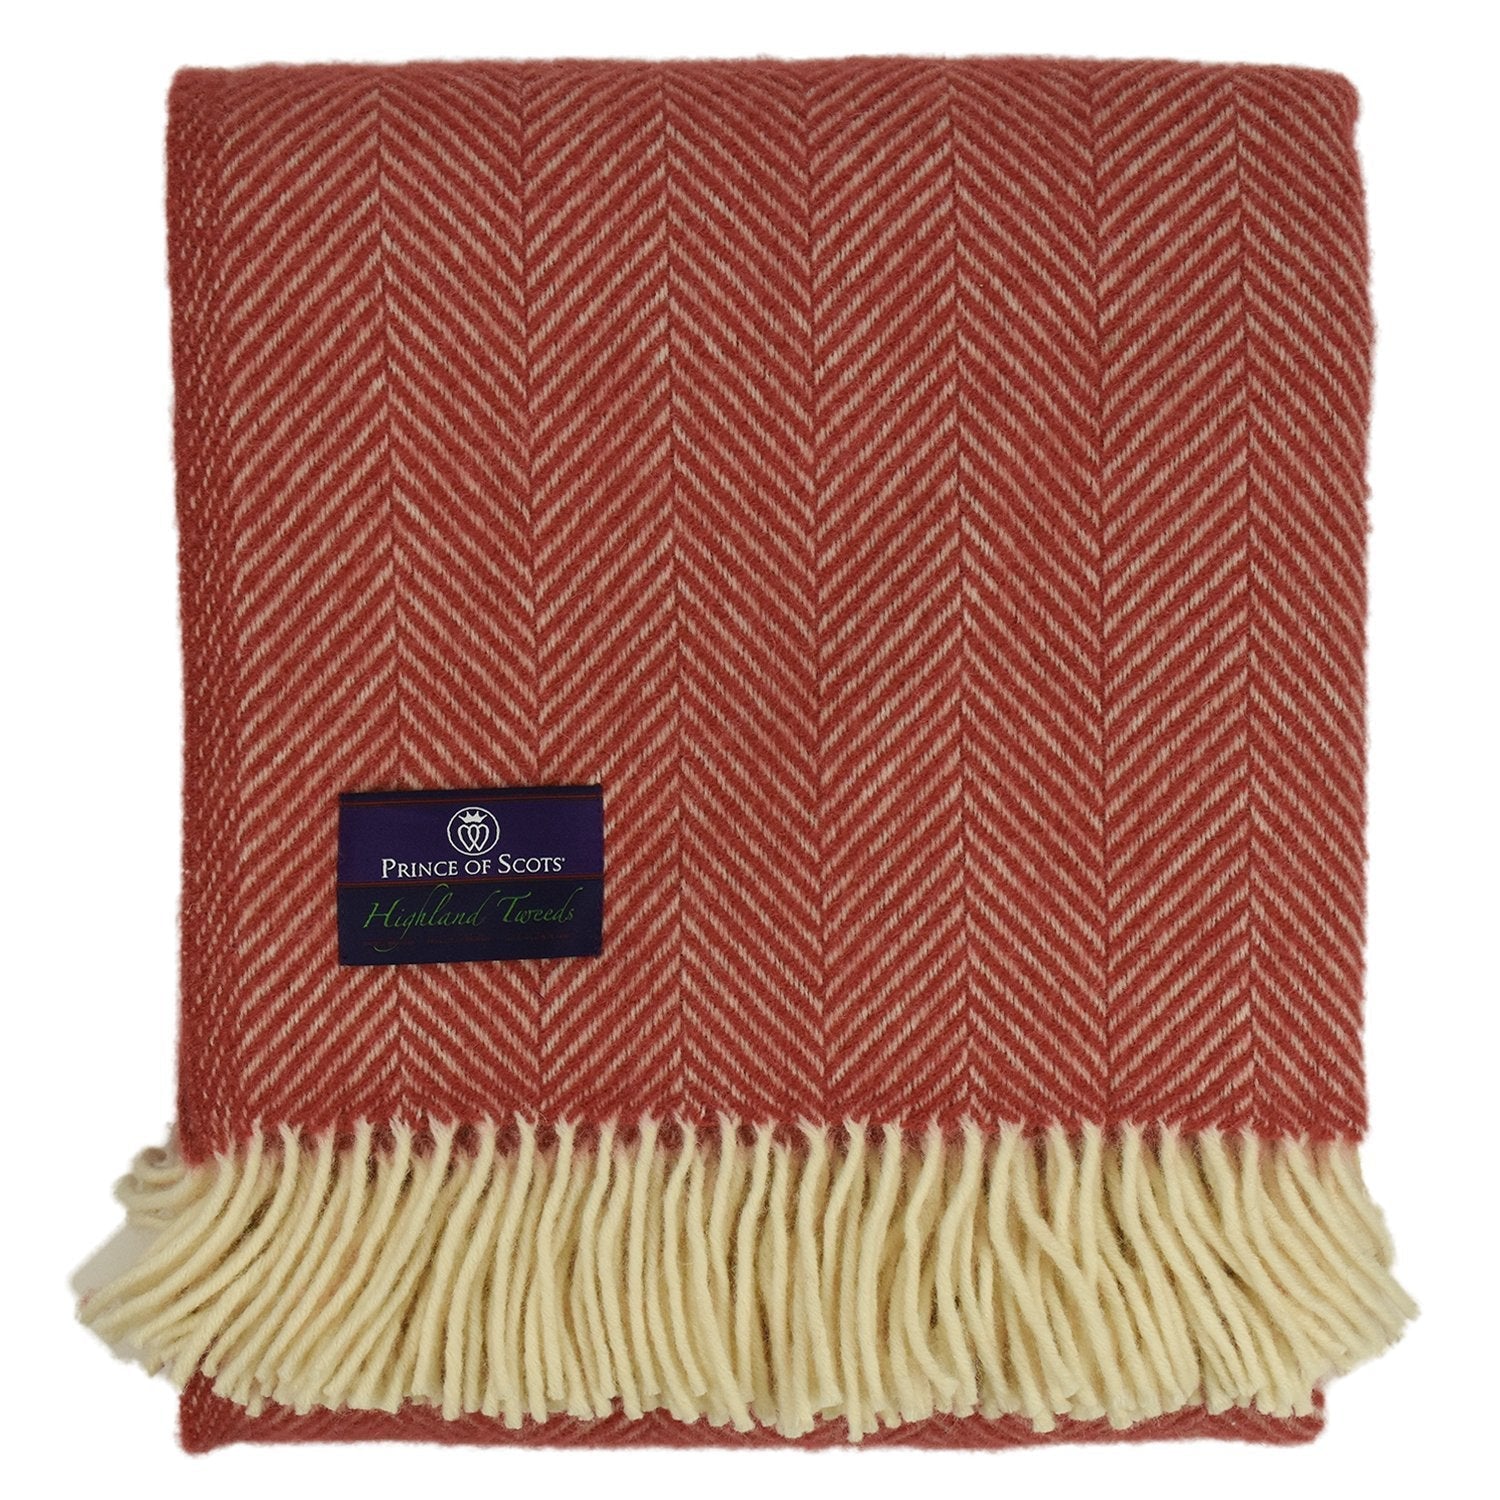 Highland Tweed Herringbone Pure New Wool Throw ~ Grenadine ~-Throws and Blankets-Prince of Scots-00810032750107-K4050030-25-Prince of Scots